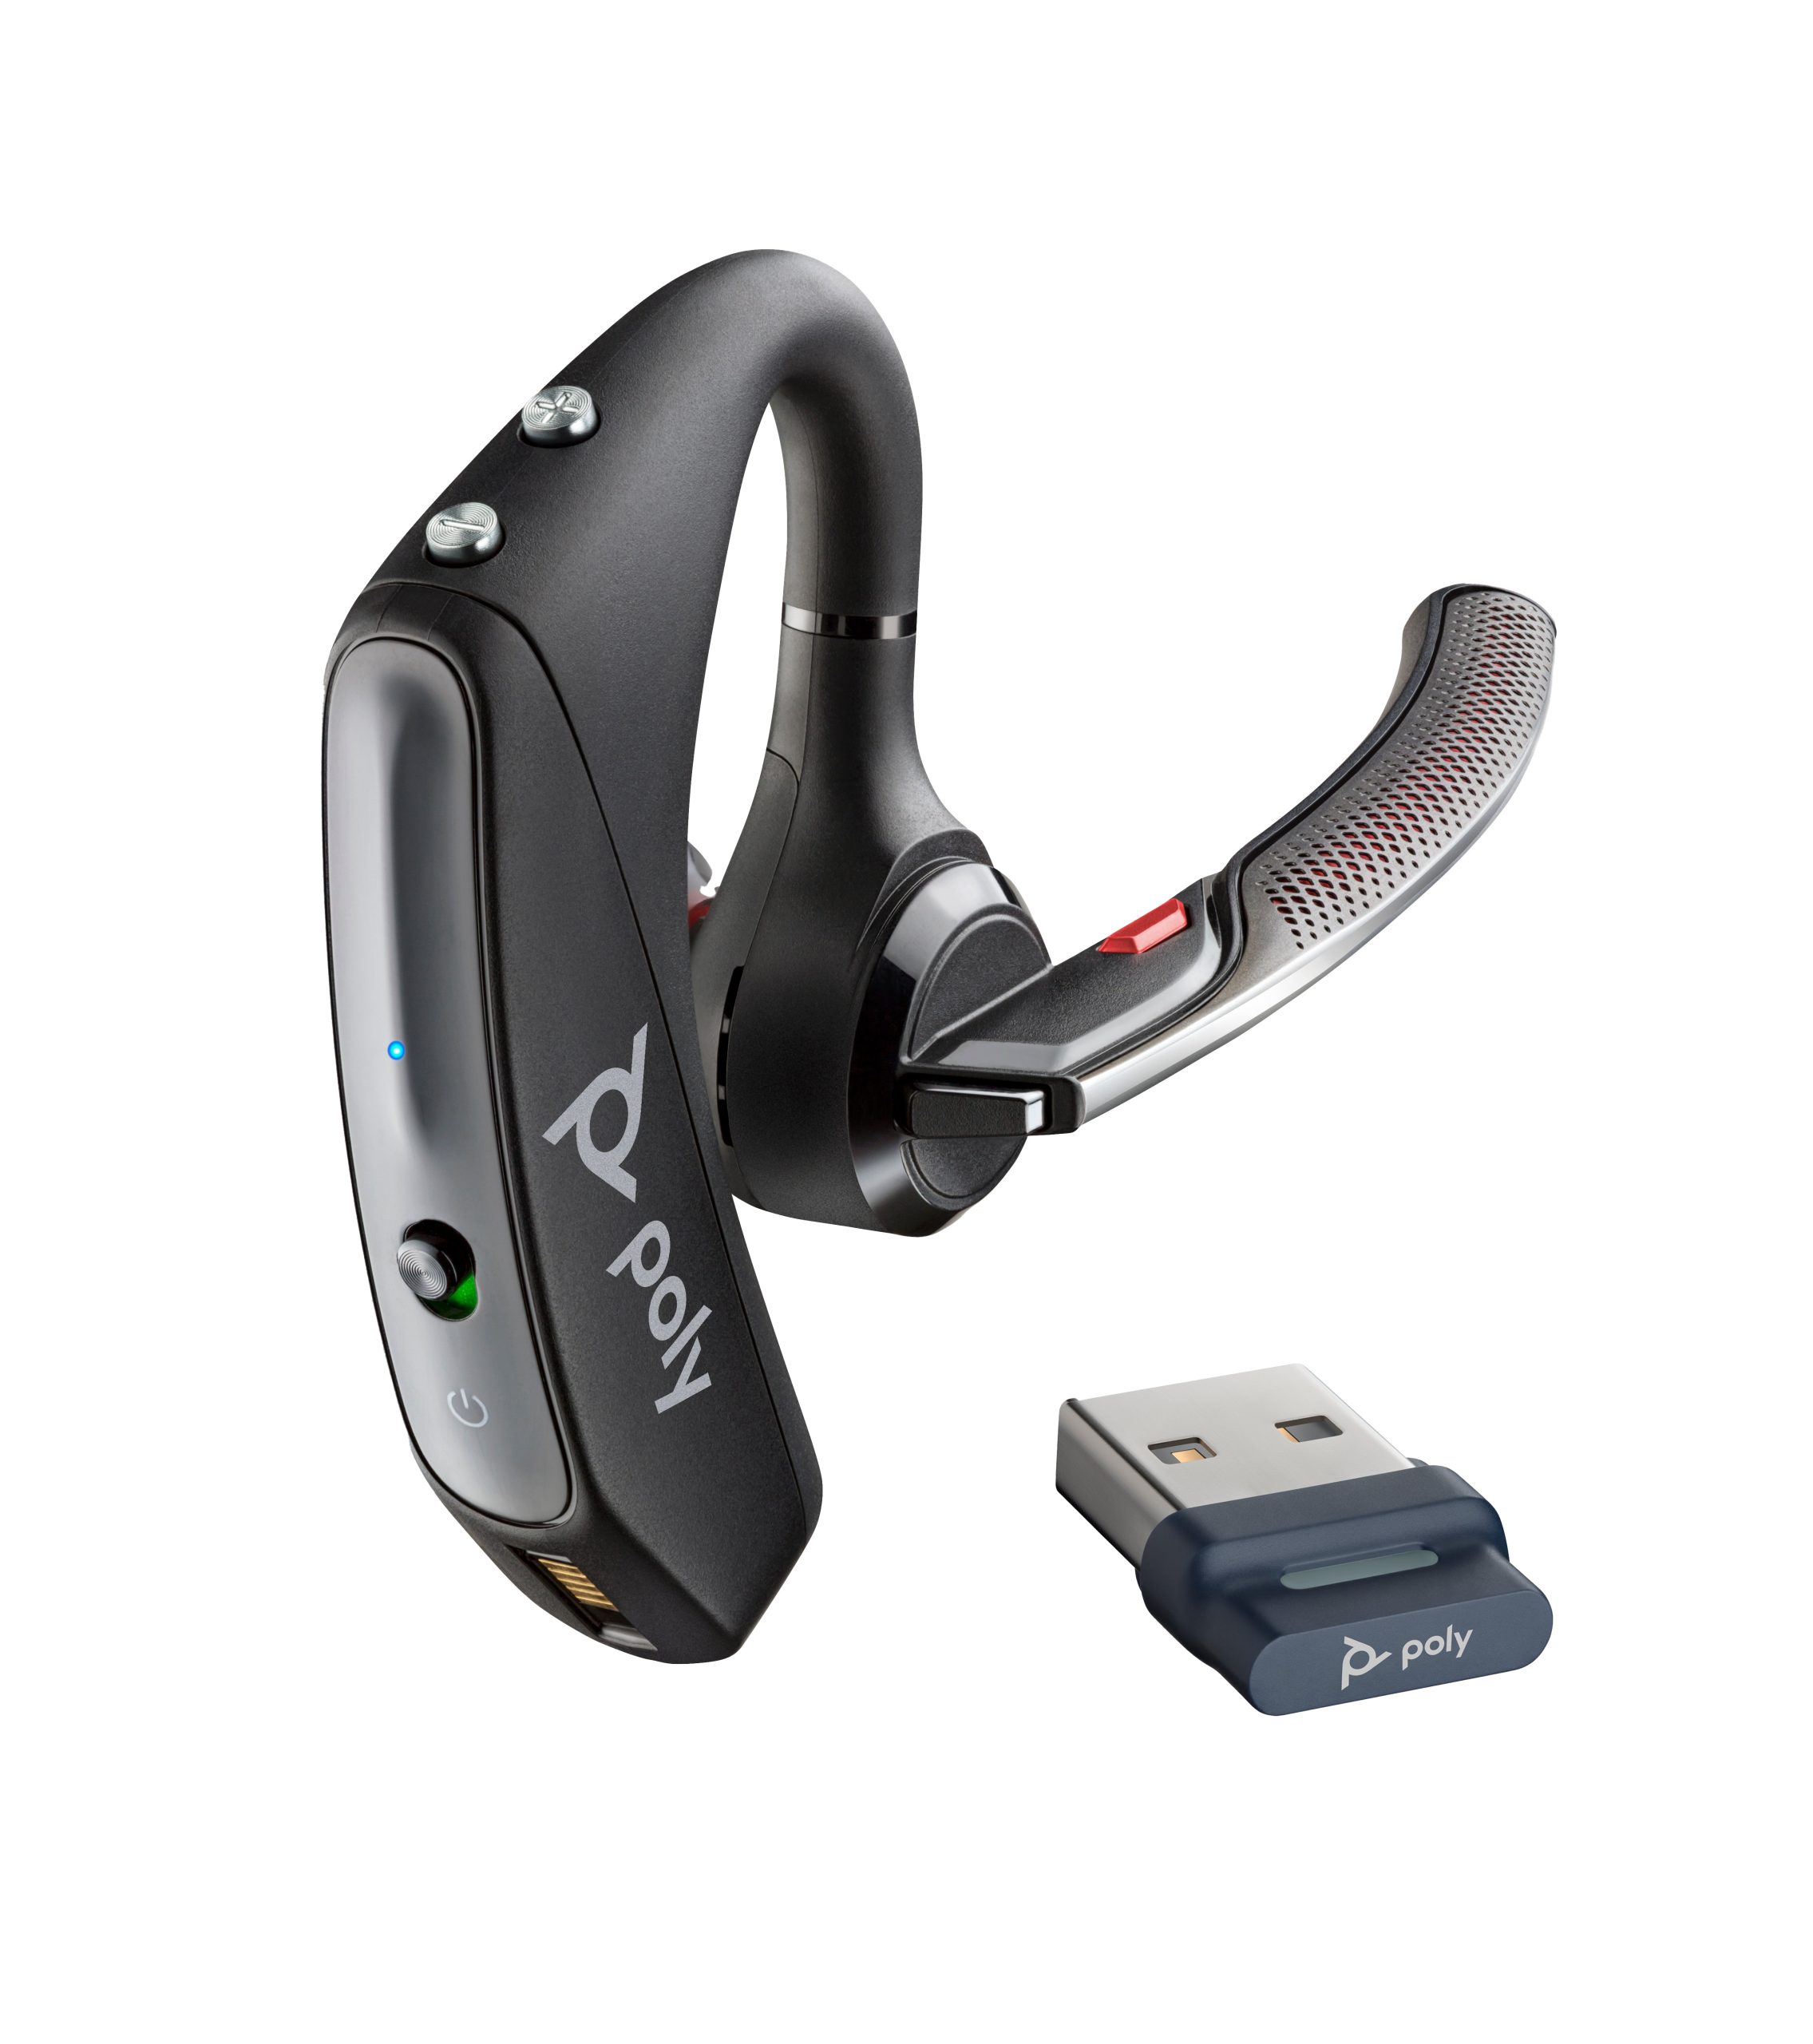 AURICULAR PTS VOYAGER 5200 UC 206110-102 -